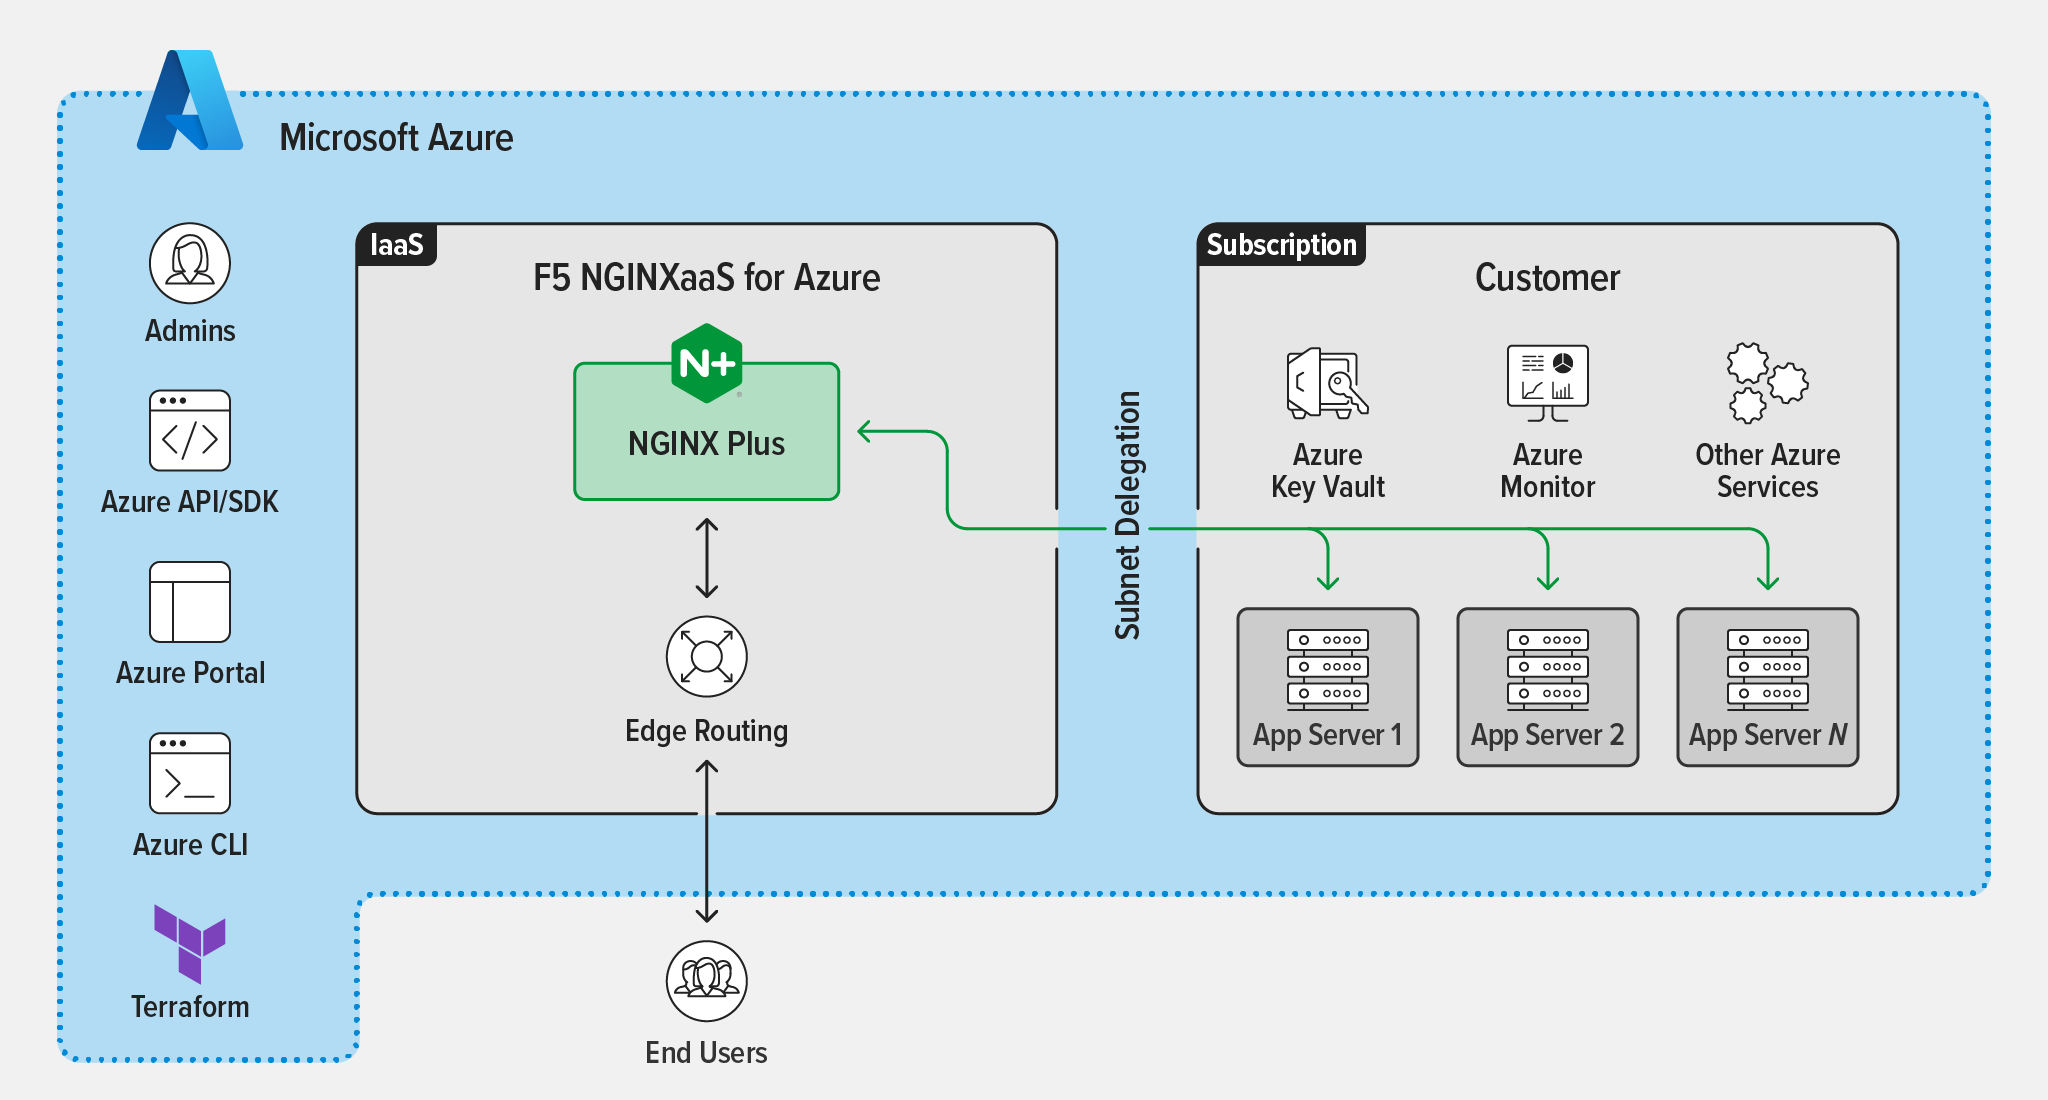 Topology diagram showing F5 NGINXaaS for Azure in the Microsoft Azure ecosystem